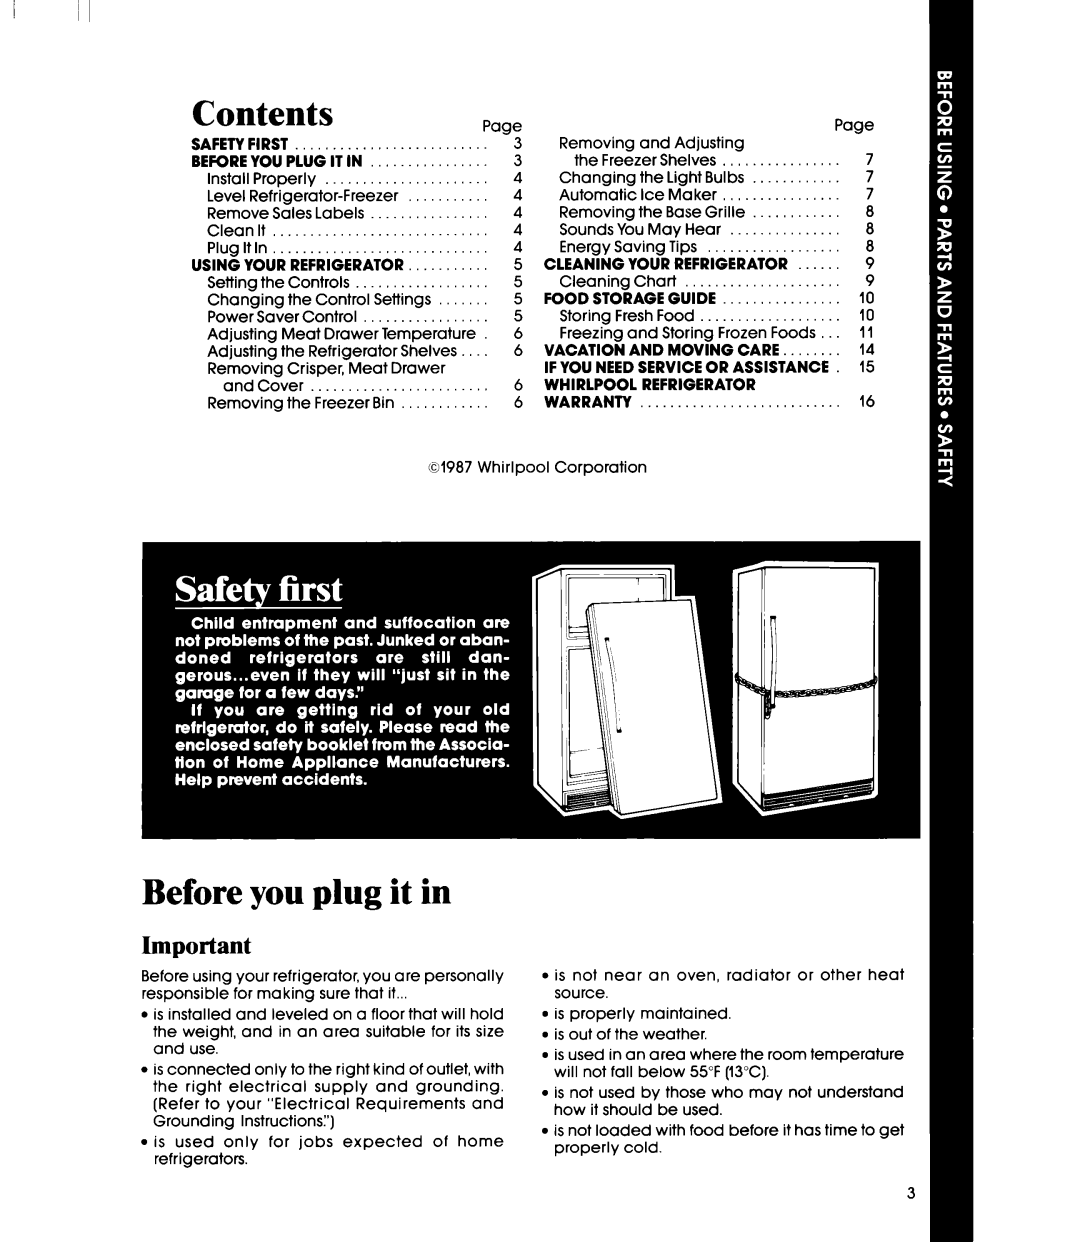 Whirlpool ED22PM manual Contents, Before you plug it in, Plugitin, Food Storage Guide, Whirlpool Refrigerator 